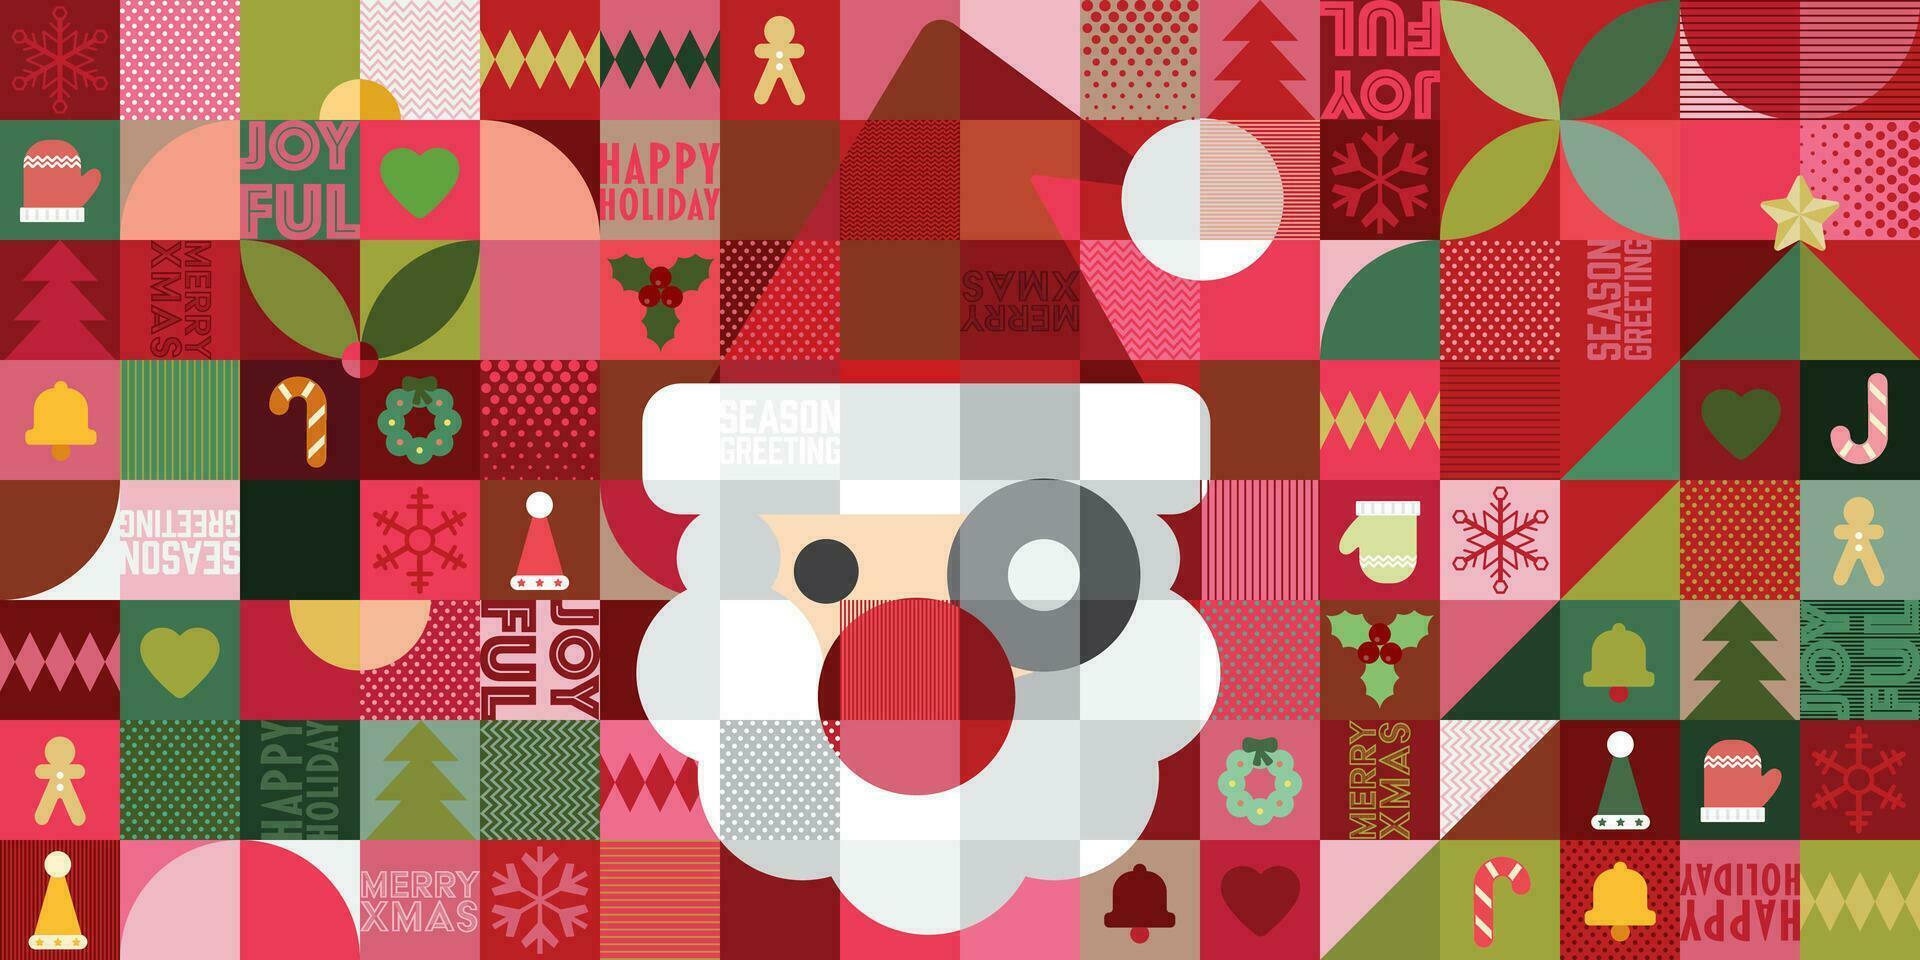 Merry Christmas and colorful Christmas elements in mosaic punchy style vector illustration.